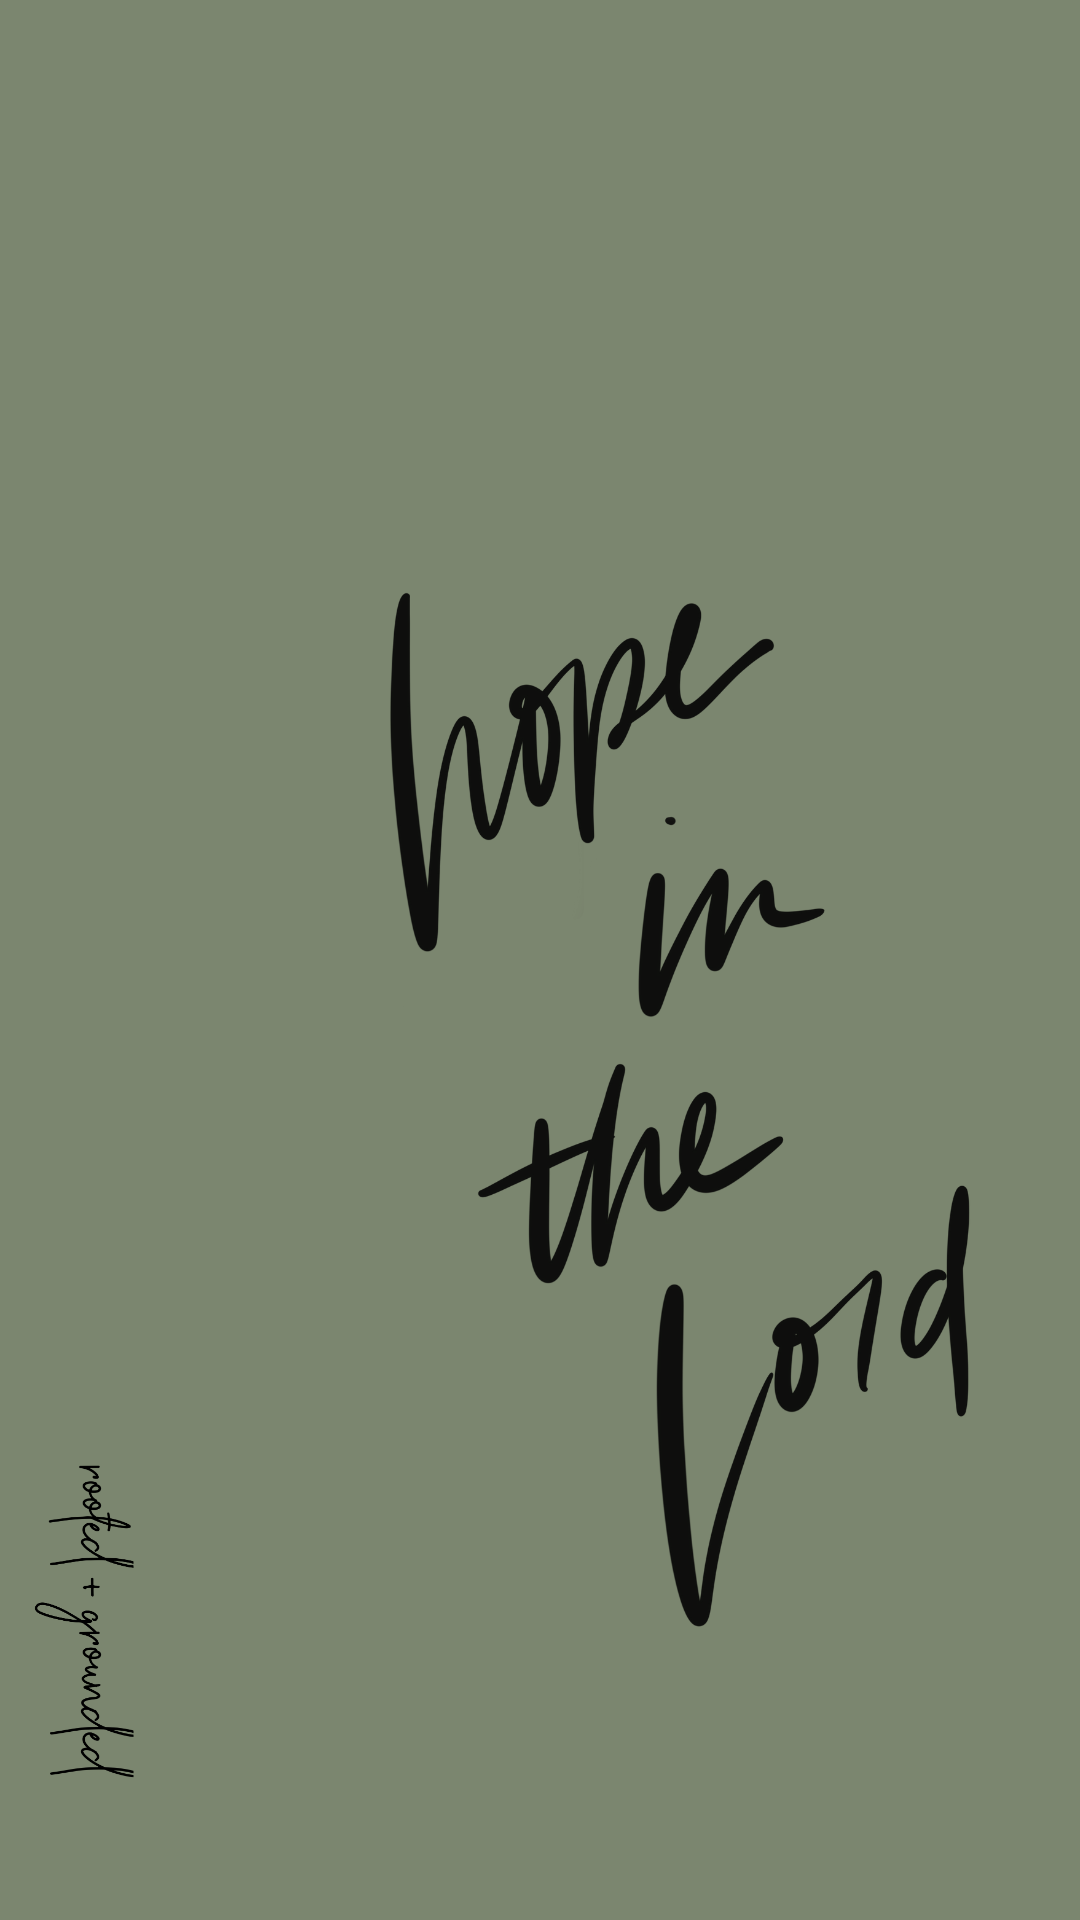 Pretty Christian iPhone Wallpaper. Download Our Collection for Free!